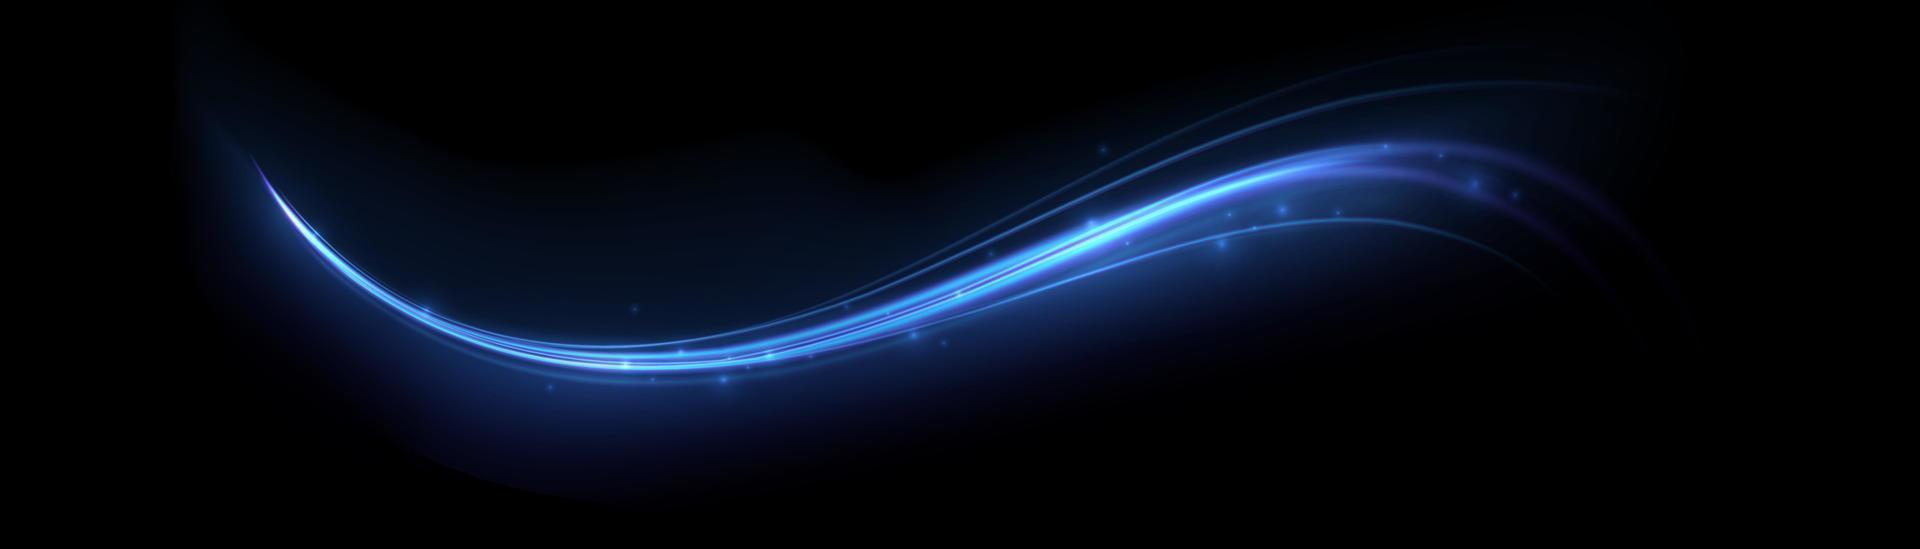 Blue glowing shiny lines effect vector background. Luminous white lines of speed. Light glowing effect. Light trail wave, fire path trace line and incandescence curve twirl.